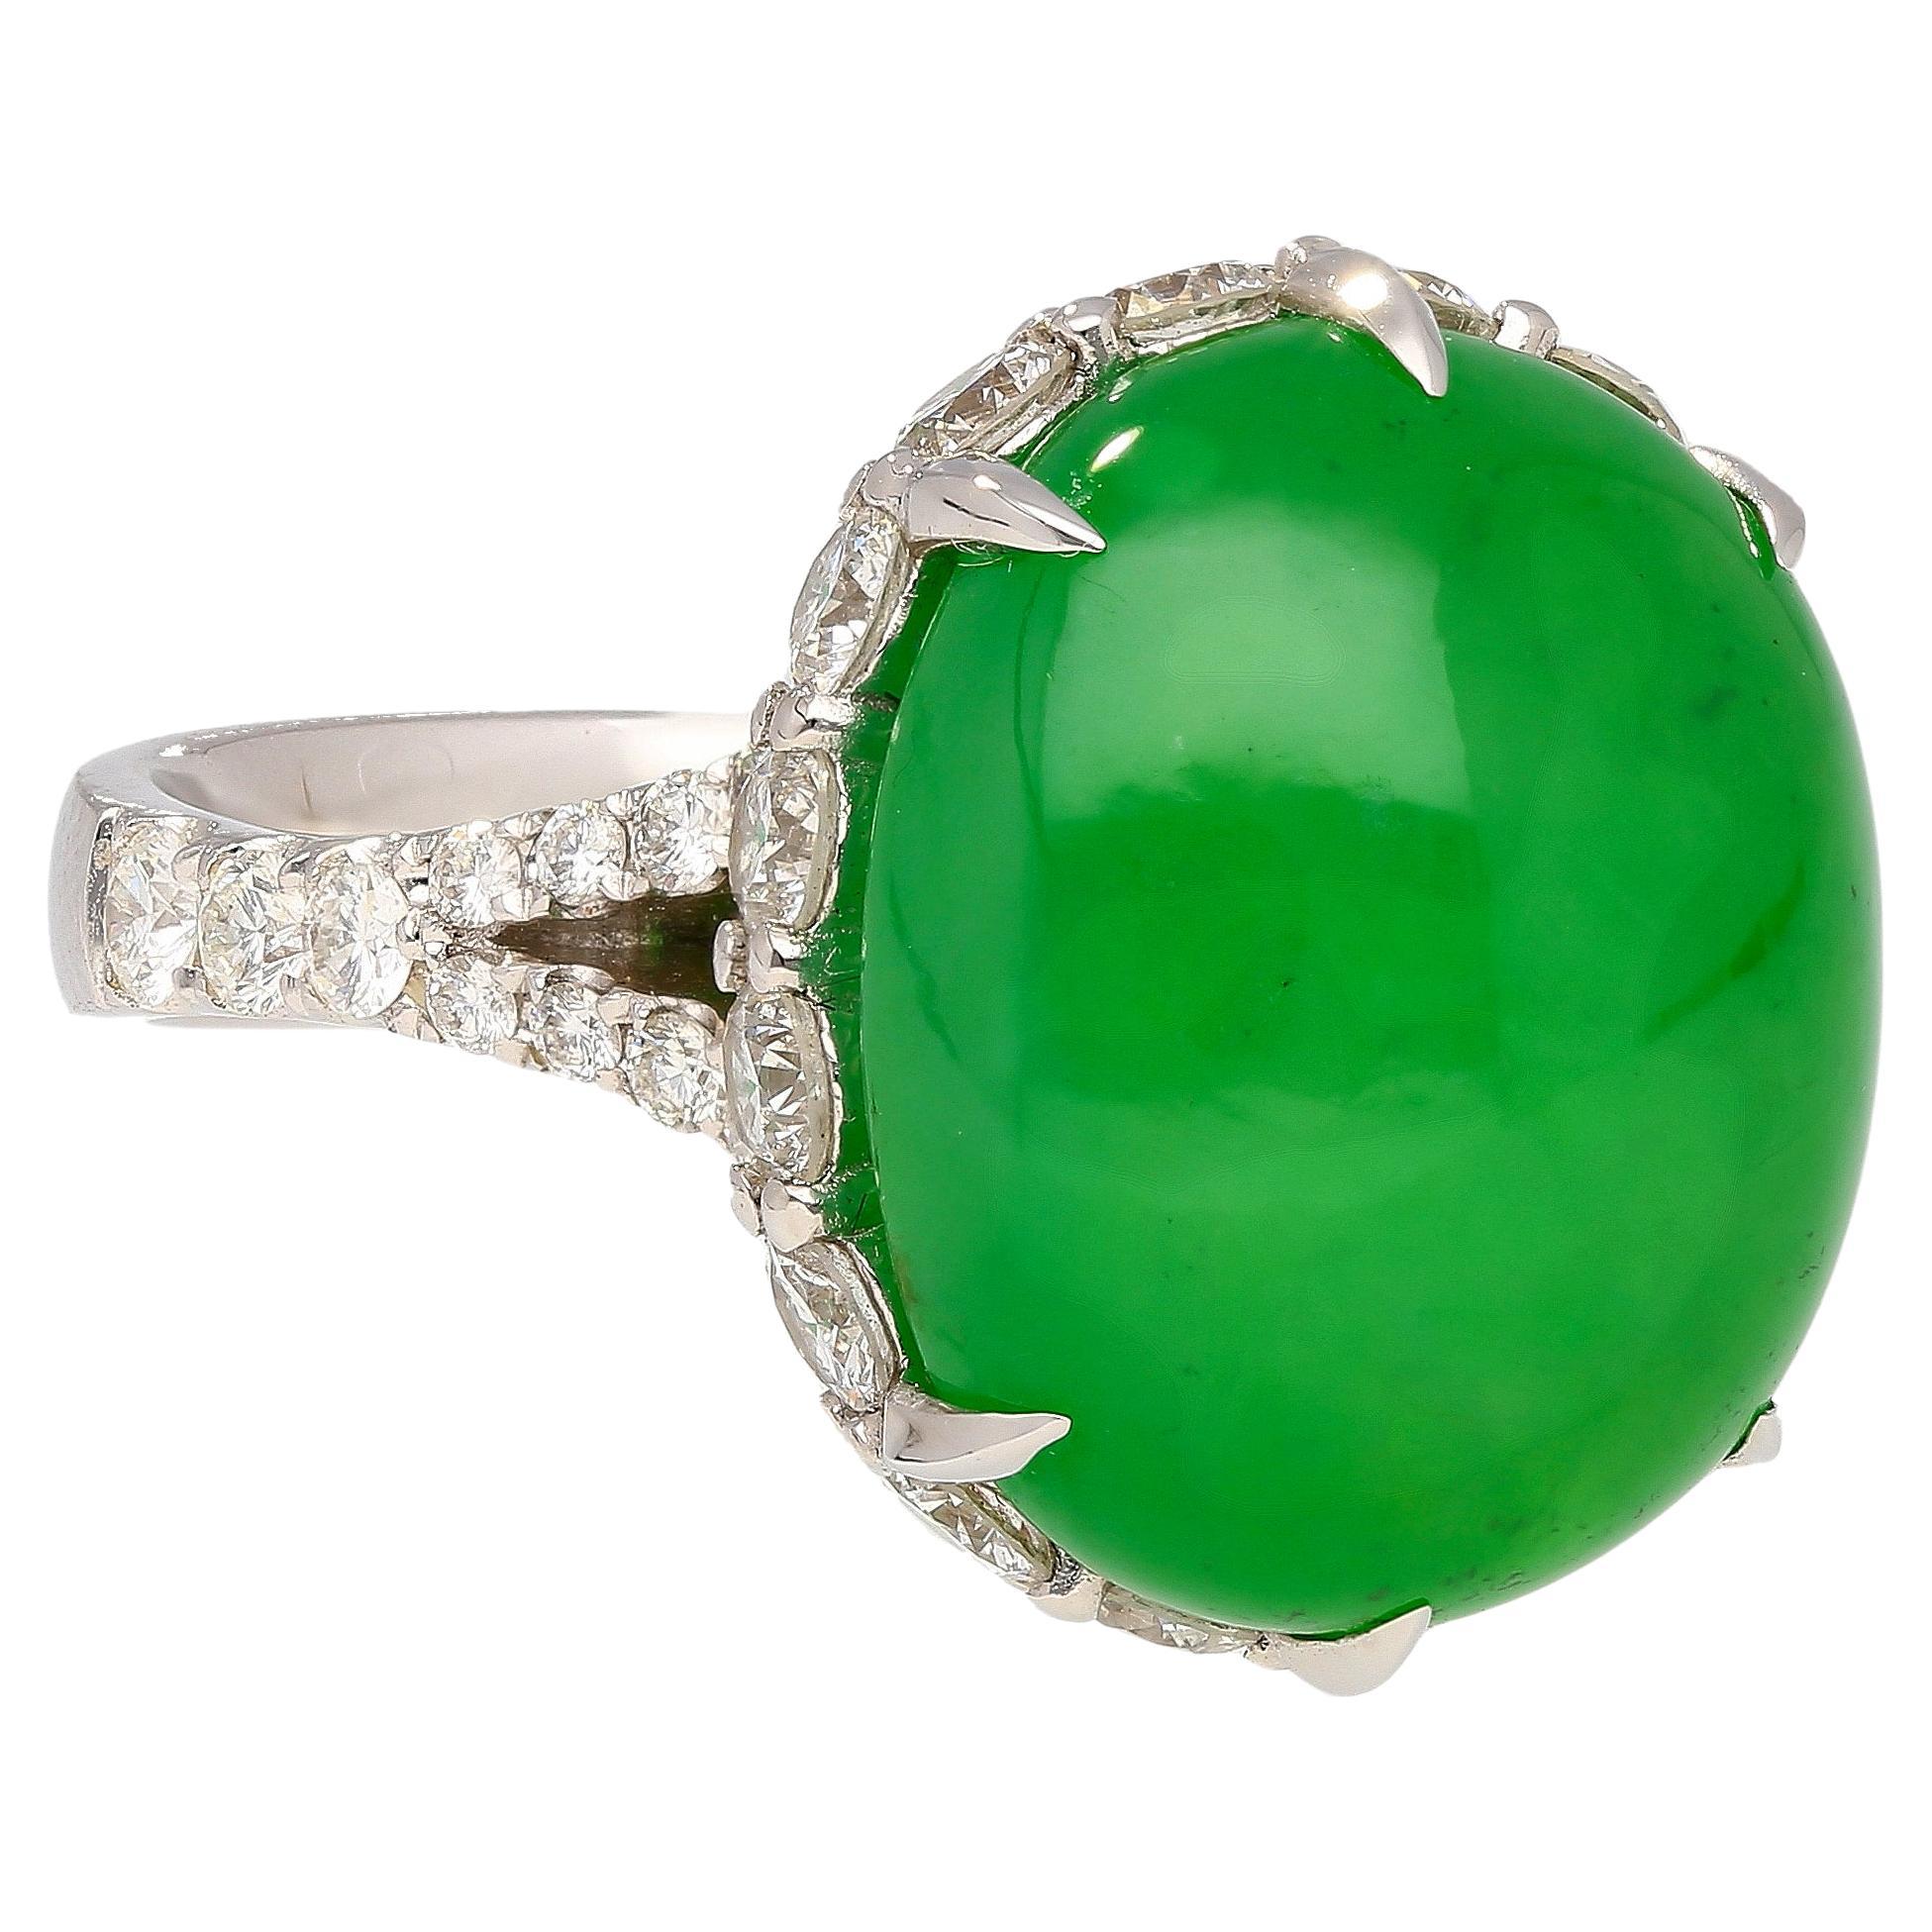 17.86 Carat Oval Cut Jadeite Jade and Diamond Ring in 18K White Gold For Sale